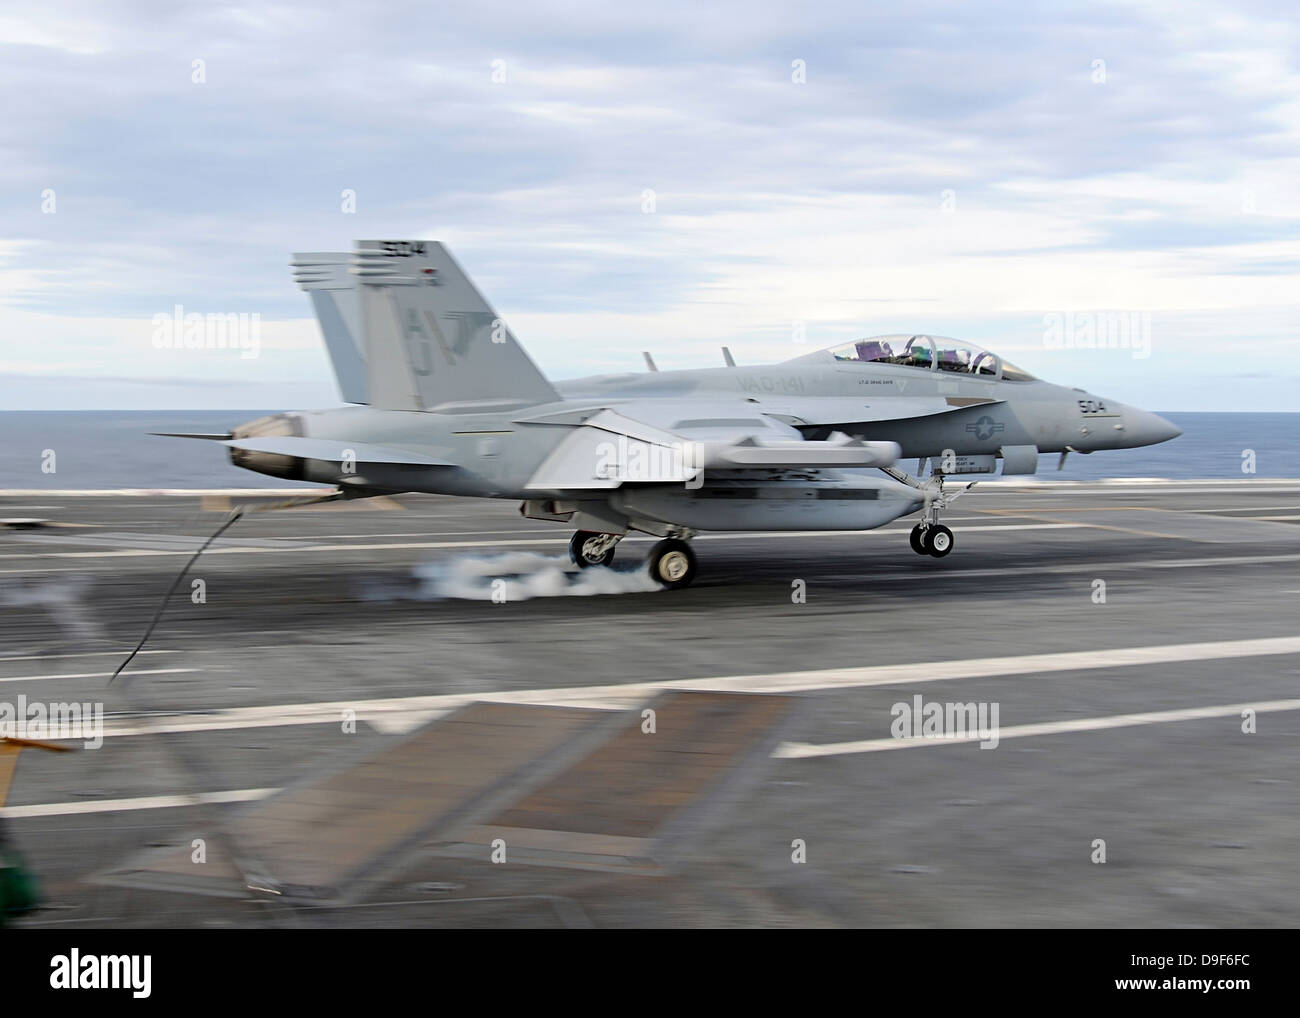 Atlantic Ocean, May 22, 2010 - An E/A-18G Growler makes an arrested landing aboard the aircraft carrier USS George H.W. Bush. Stock Photo